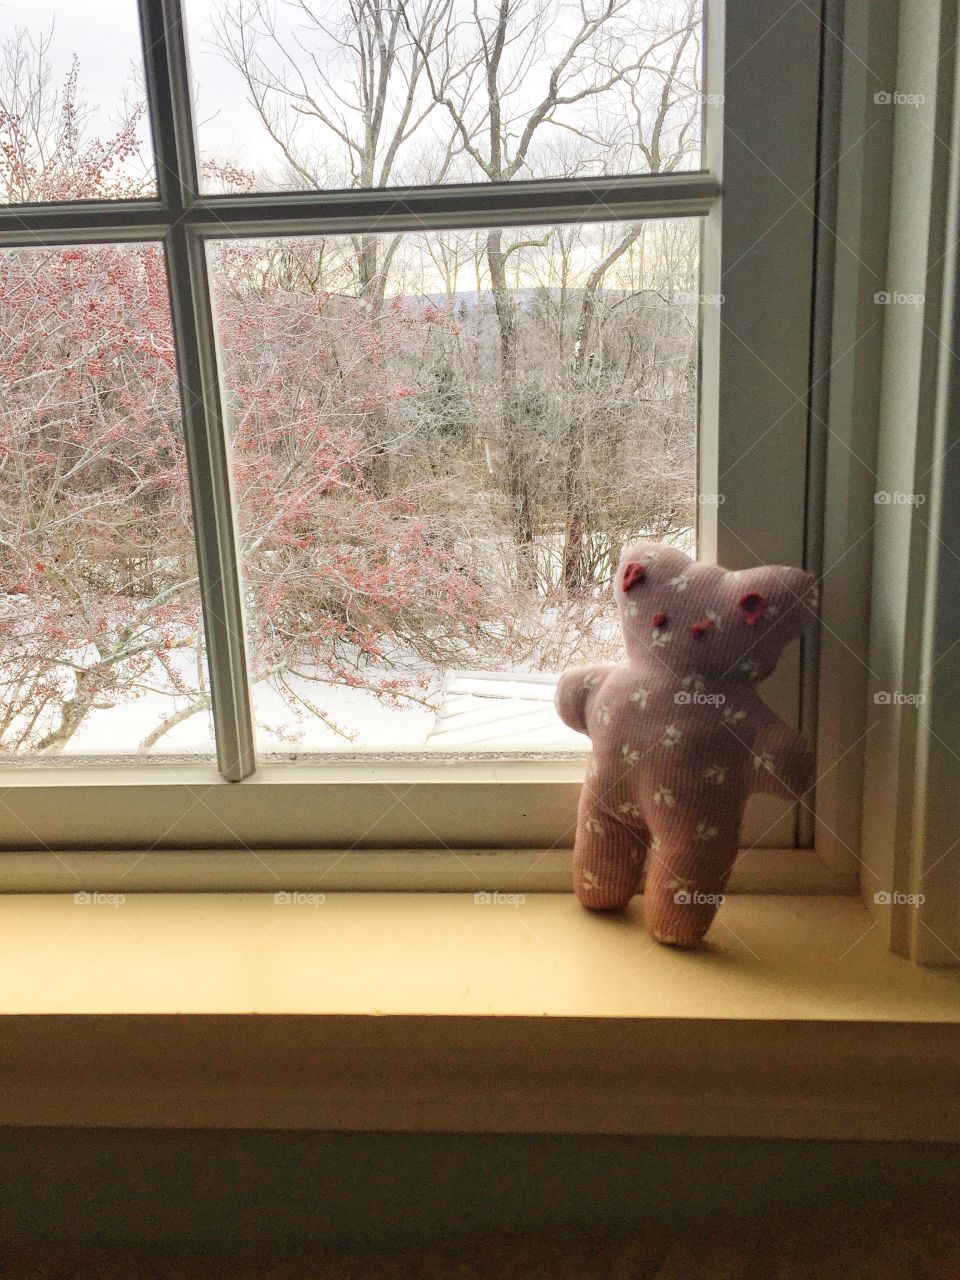 A pink teddy bear sits in the window. Outside, the snow rests on the ground and on a tree covered with red berries.